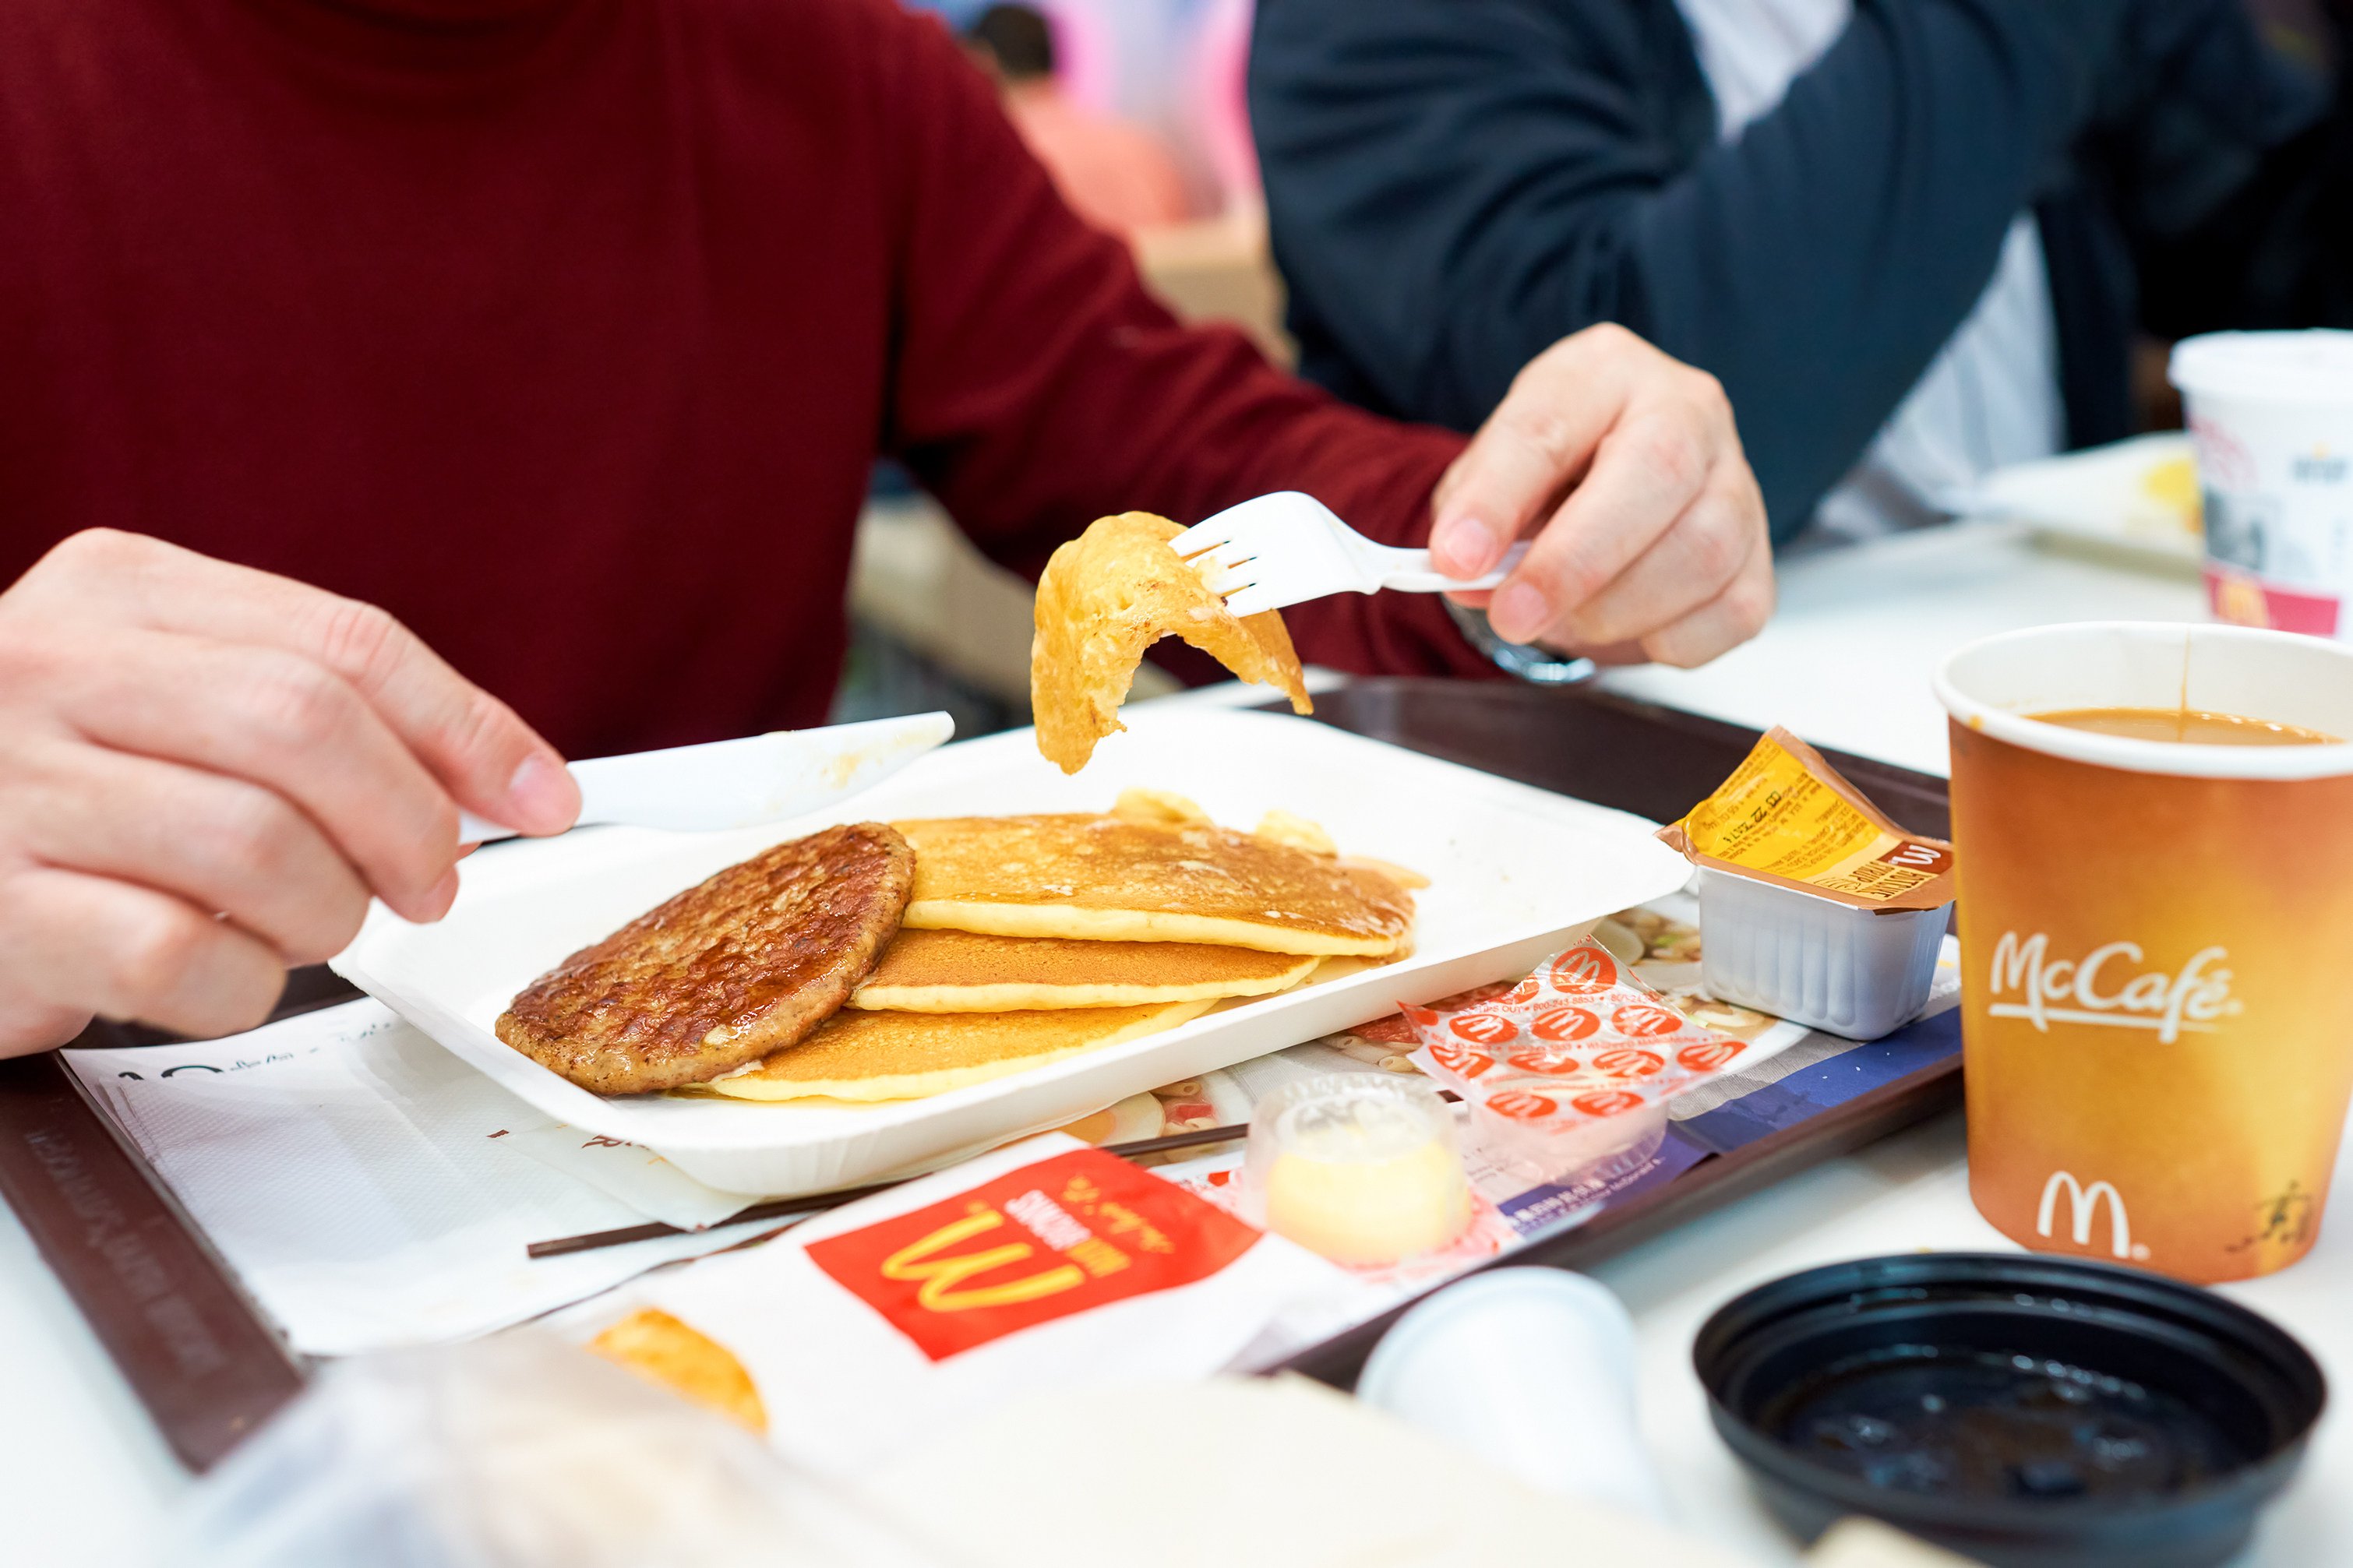 A man eat breakfast at a McDonald’s restaurant. McDonald’s Australia has cut breakfast service by 1-1/2 hours, after a shortage of eggs caused by bird flu outbreaks .Photo: Shutterstock